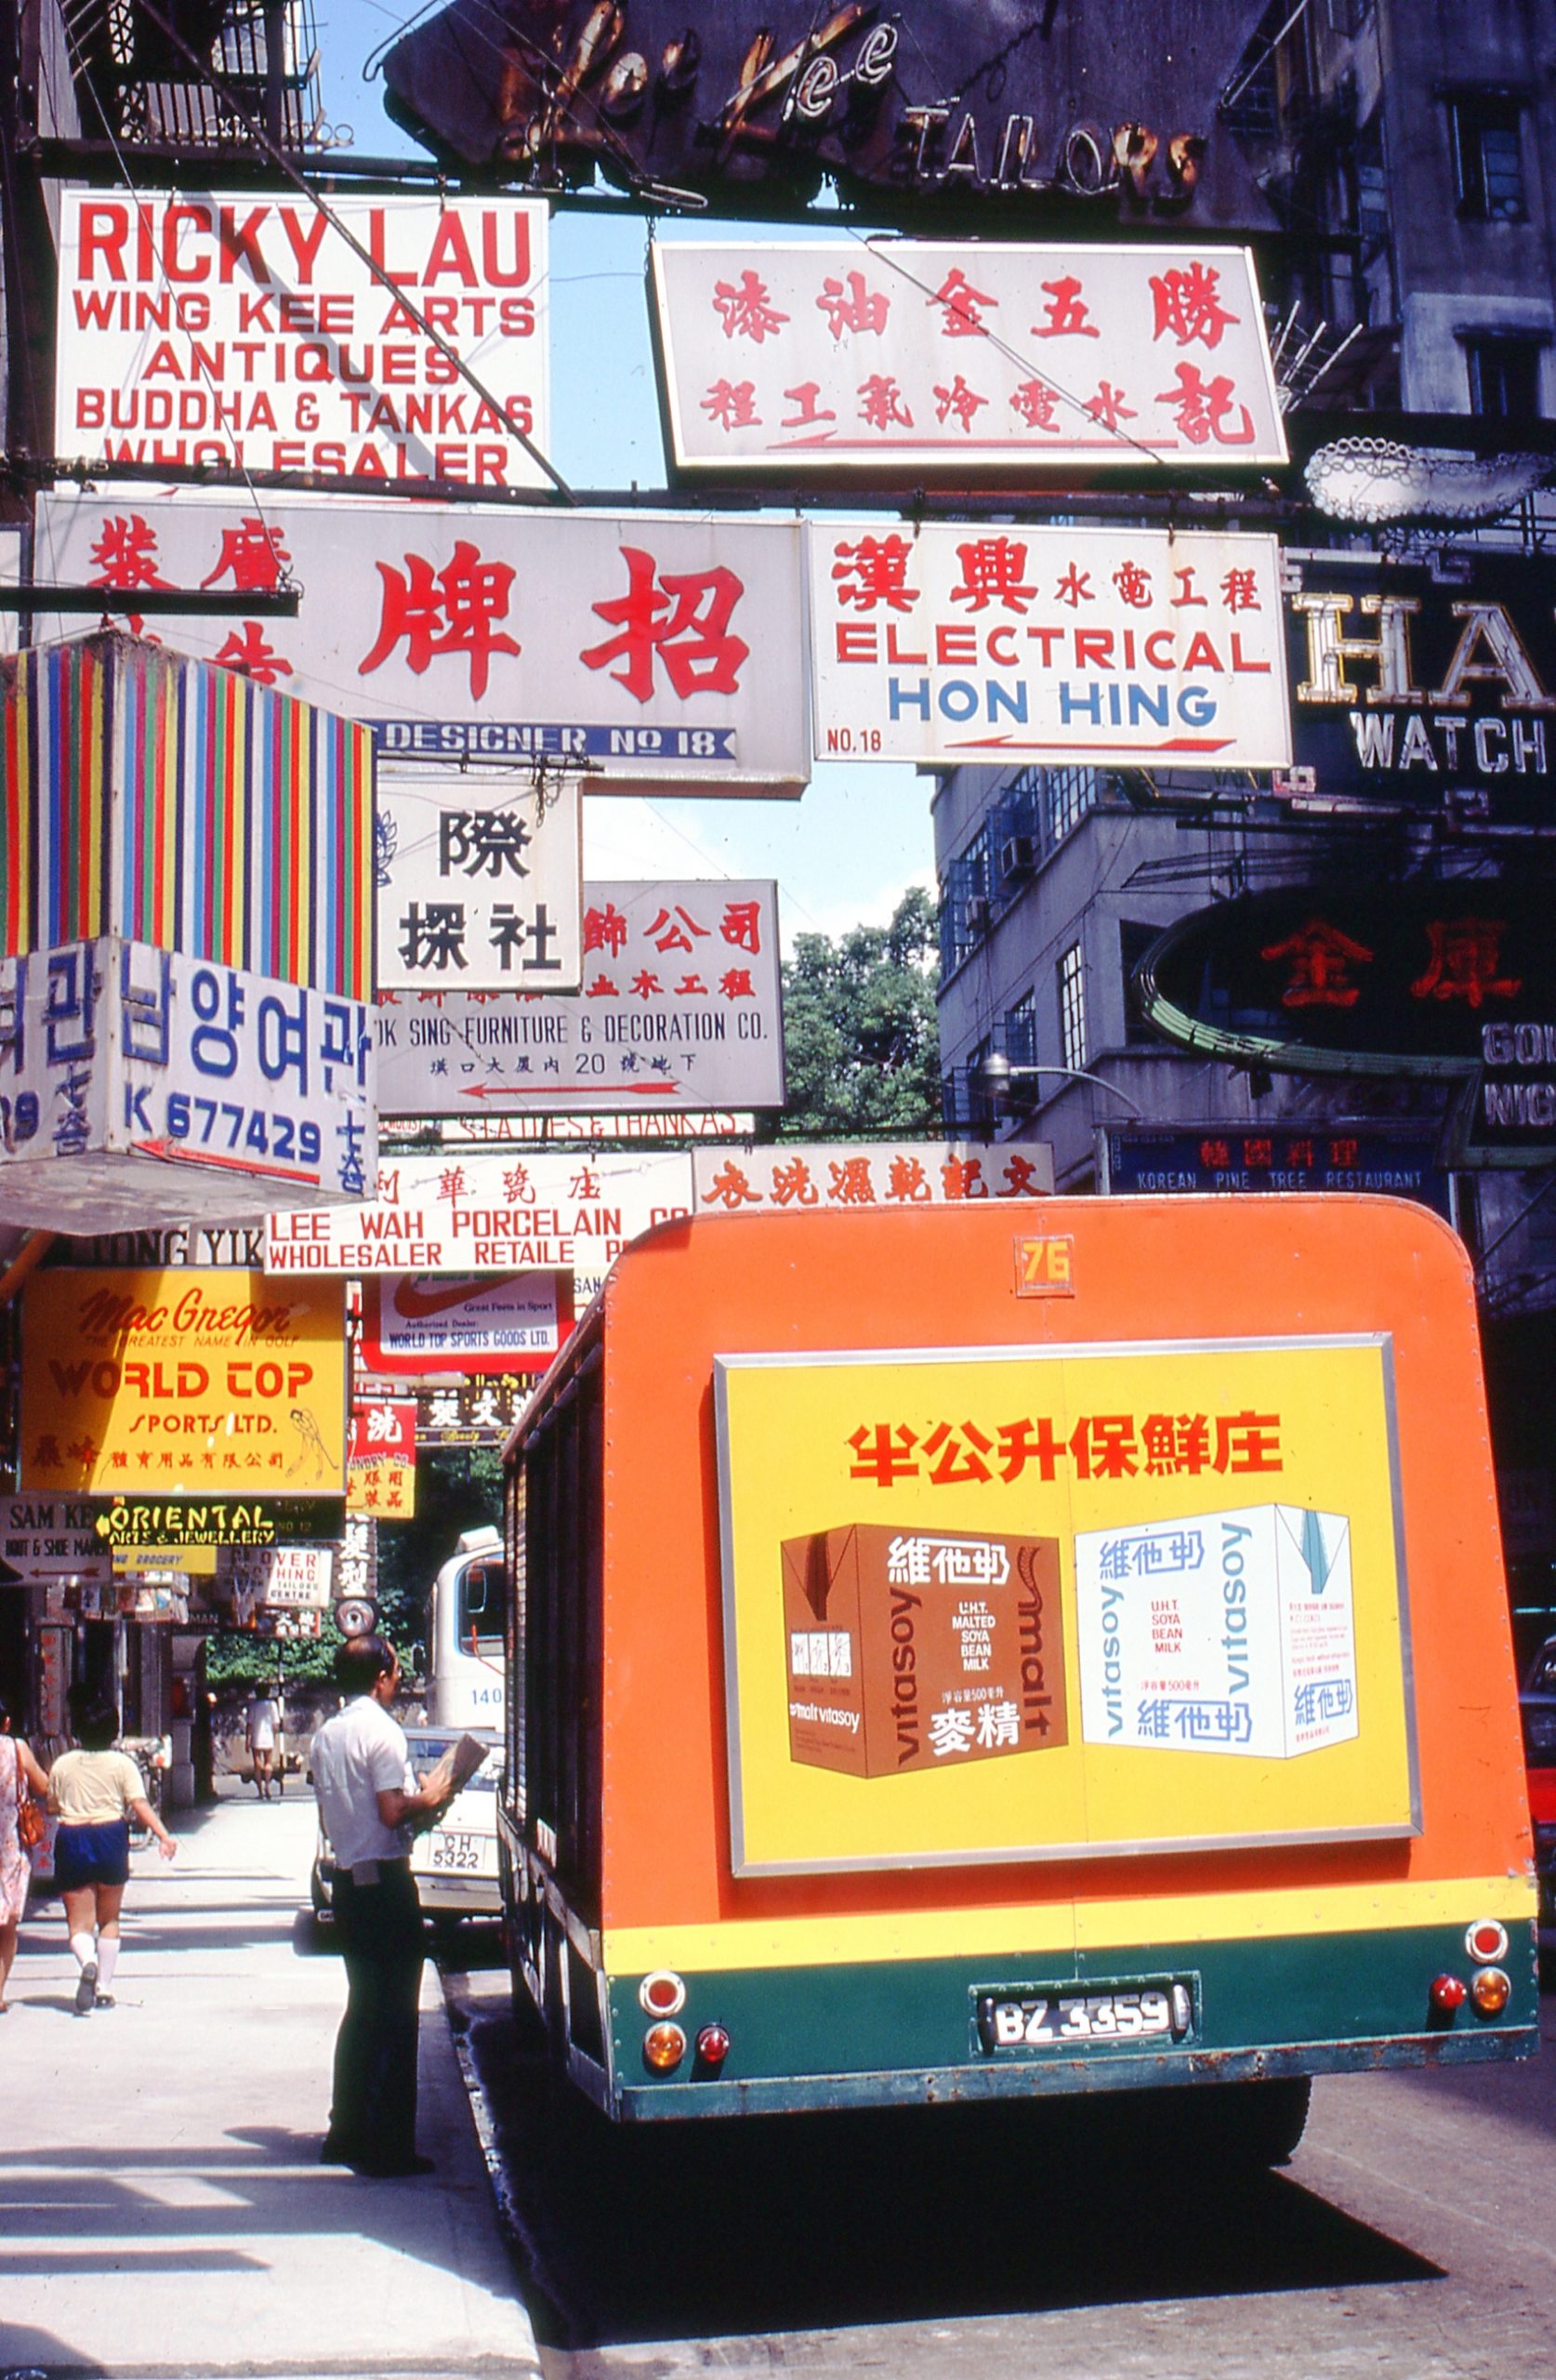 Full-colour vintage photography from old Hong Kong – scenery, transport, harbour views. Photo: Supplied.